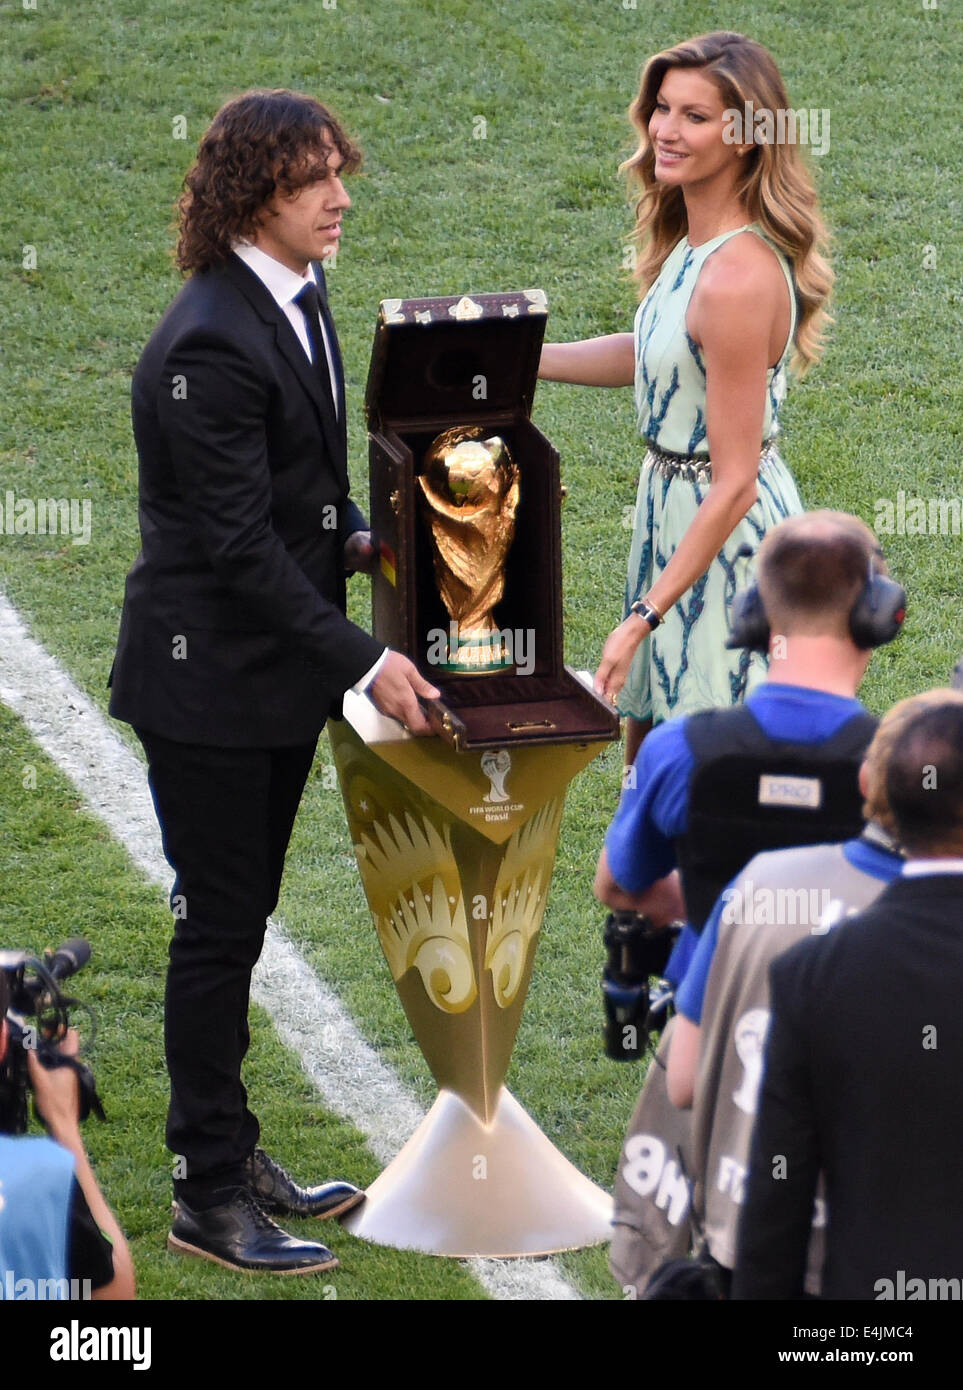 Rio de Janeiro, Brazil. 13th July, 2014. Former soccer Carles Puyol of Spain and Brazilian fashion model Gisele Buendchen pose with World Cup trophy prior to the FIFA World Cup 2014 final soccer match between Germany and Argentina at the Estadio do Maracana in Rio de Janeiro, Brazil, 13 July 2014. Photo: Thomas Eisenhuth/dpa/Alamy Live News Stock Photo